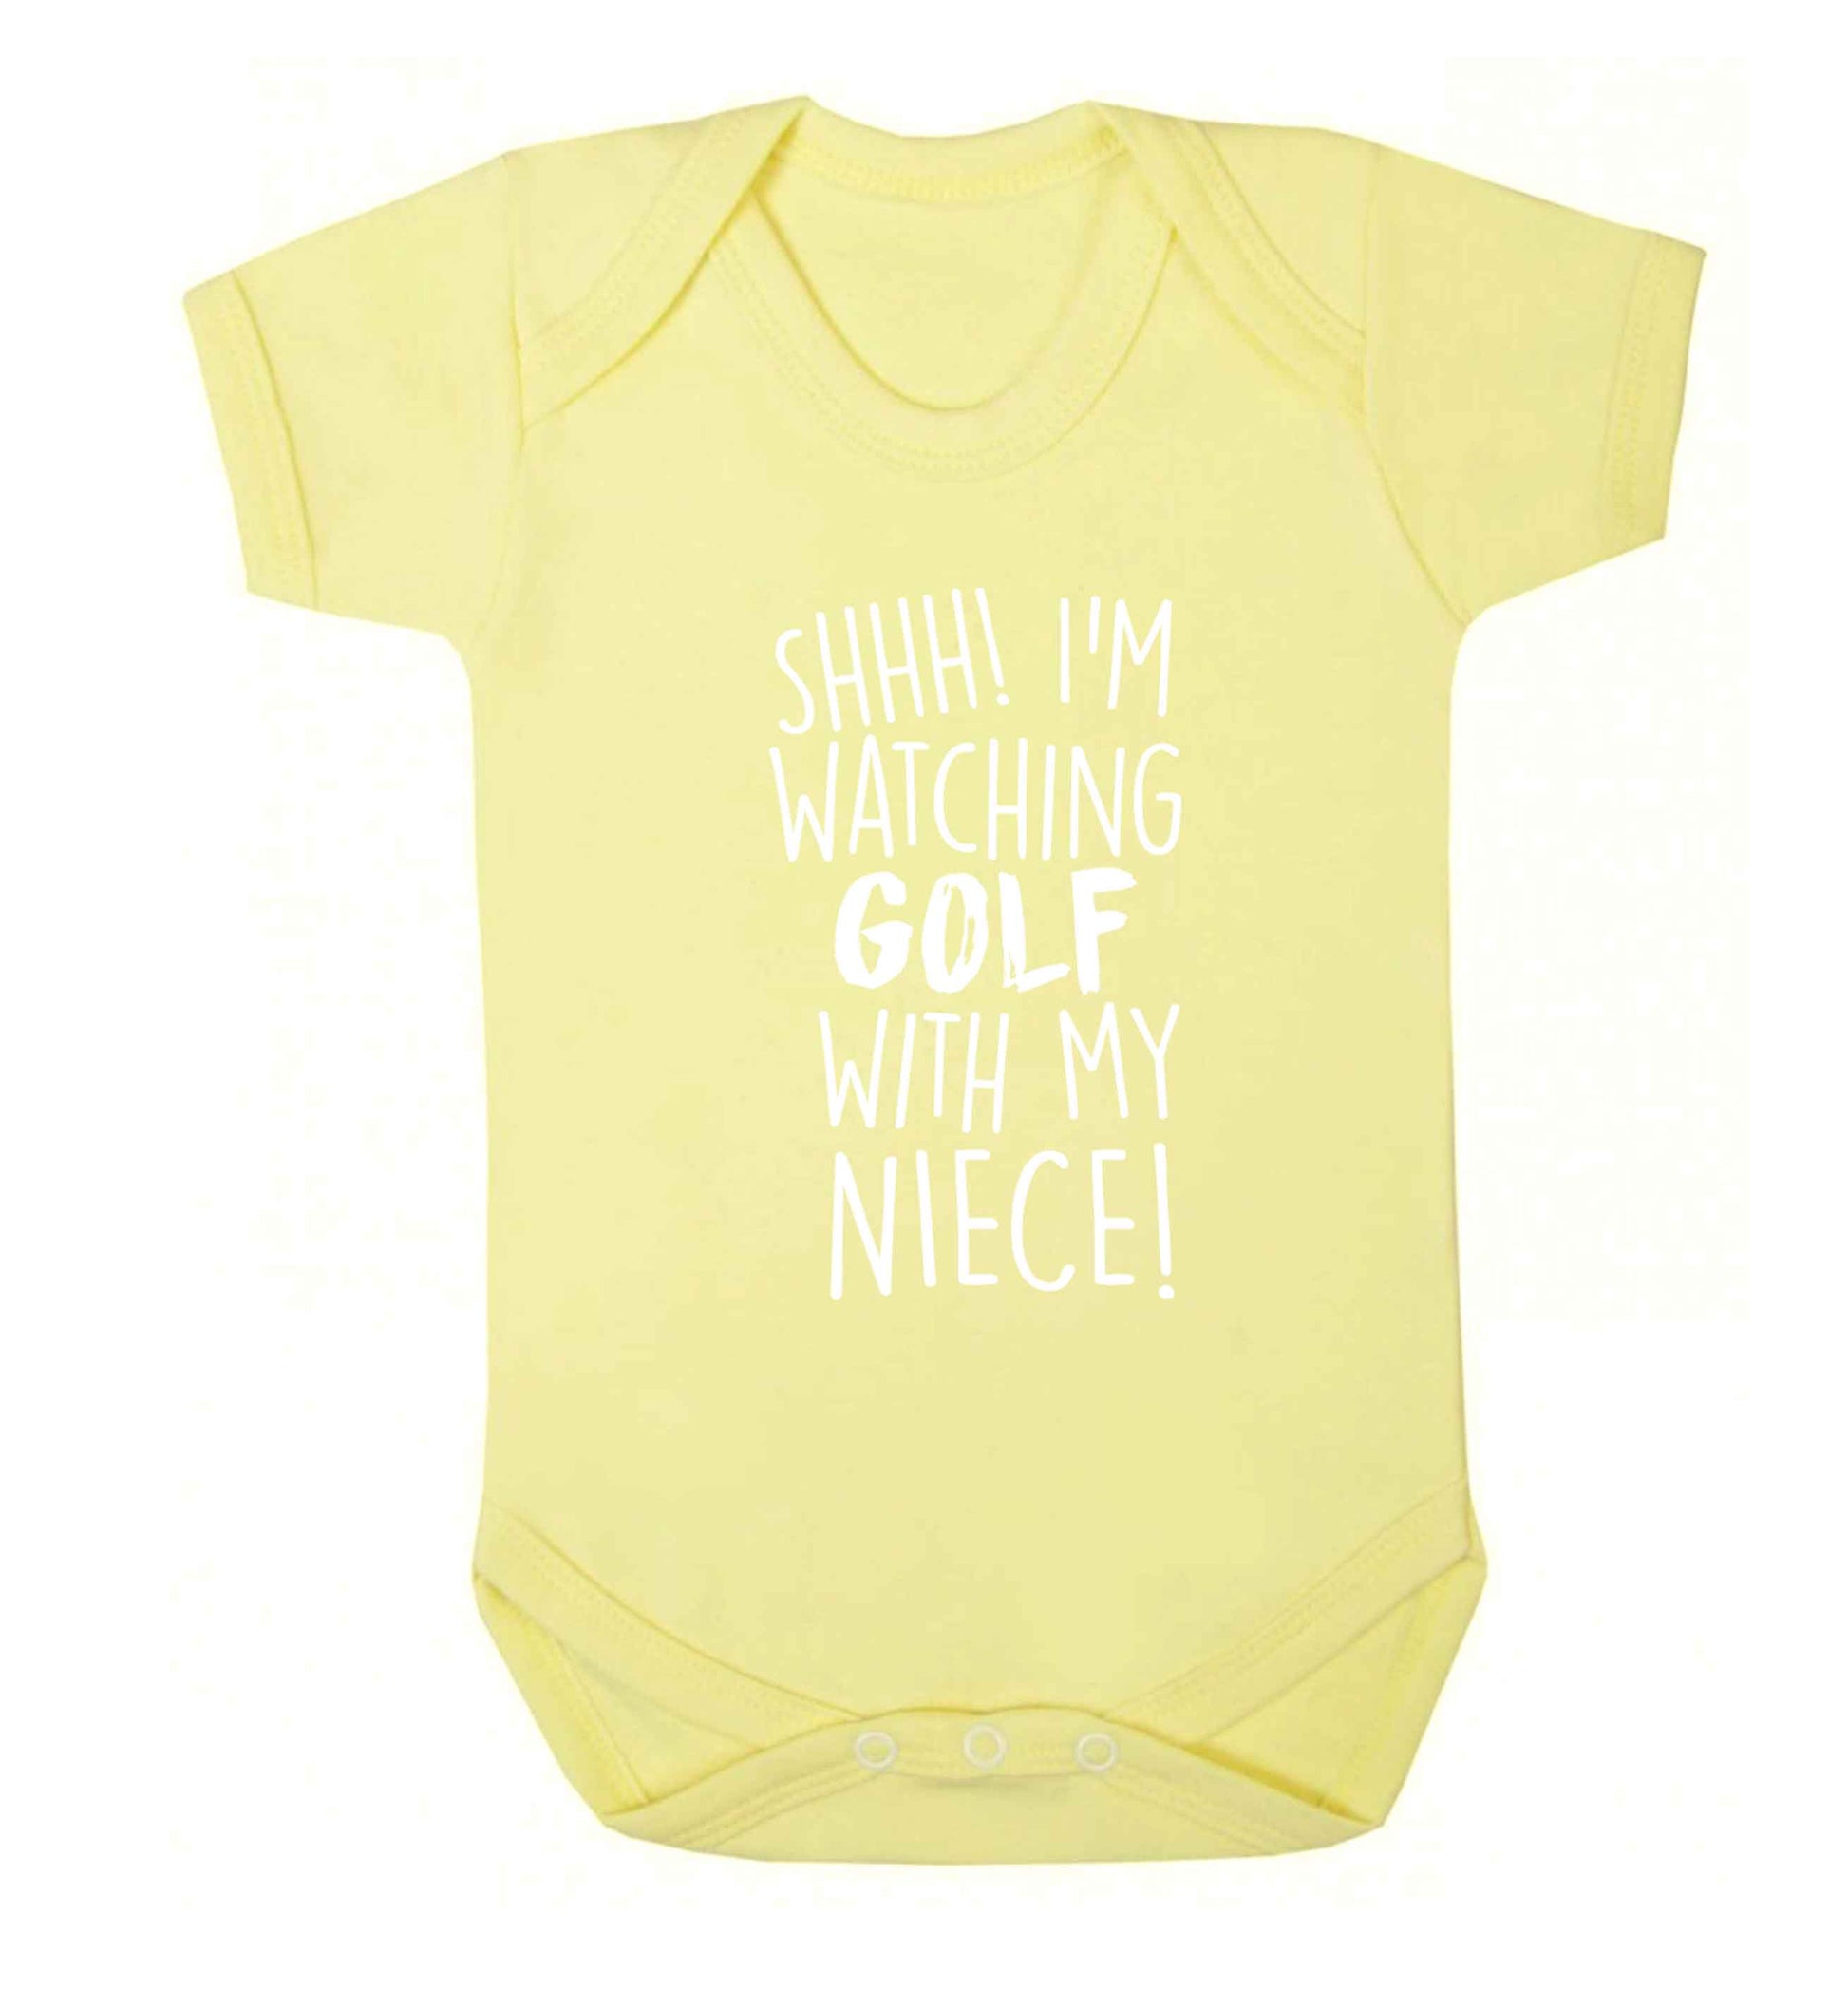 Shh I'm watching golf with my niece Baby Vest pale yellow 18-24 months